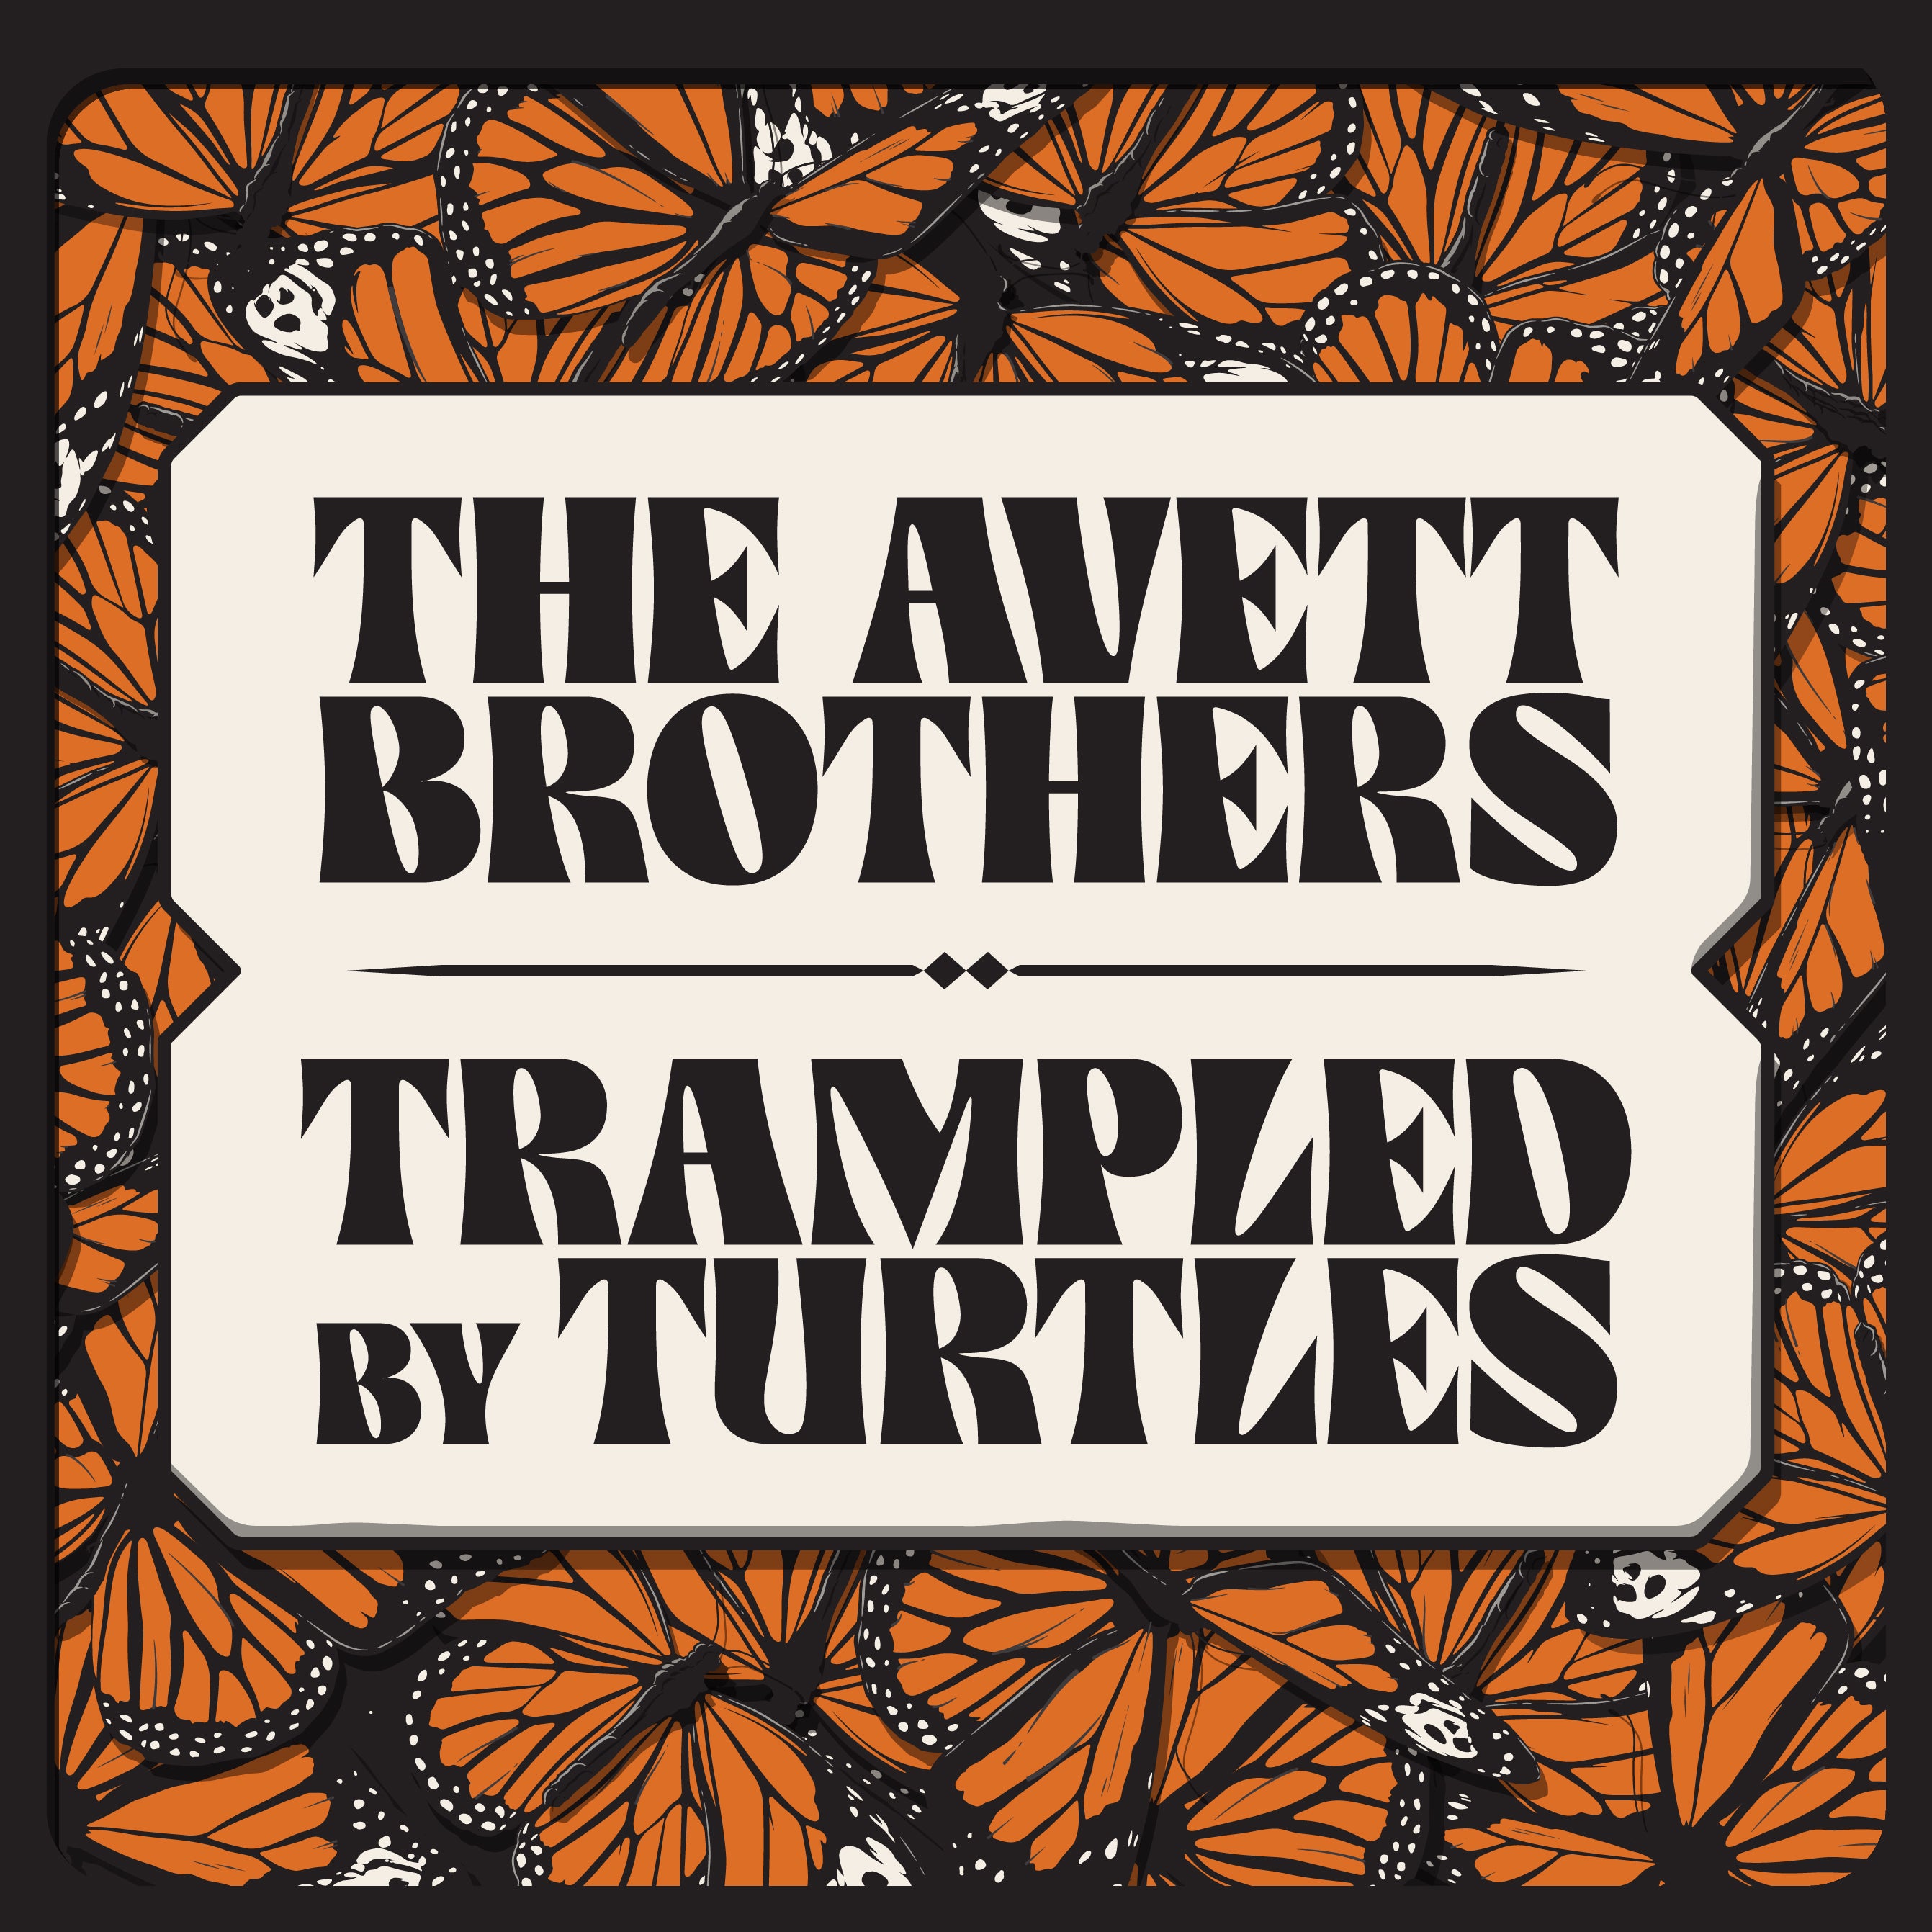 The Avett Brothers and Trampled by Turtles